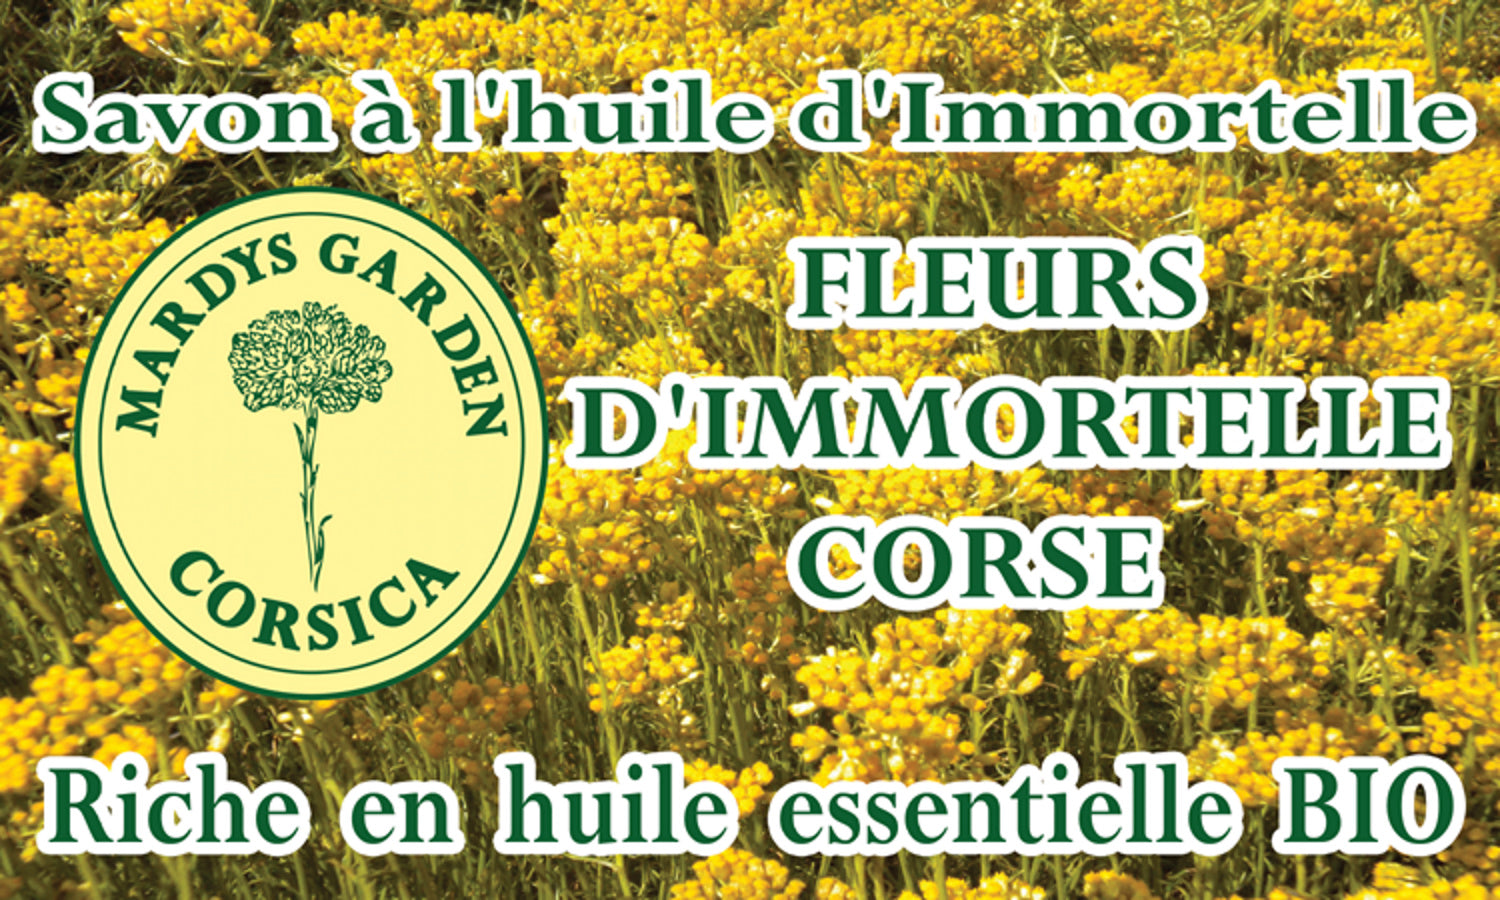 Immortelle Flowers Soap 100g label. Immortelle Flowers from Corsica. Rich in organic essential oil